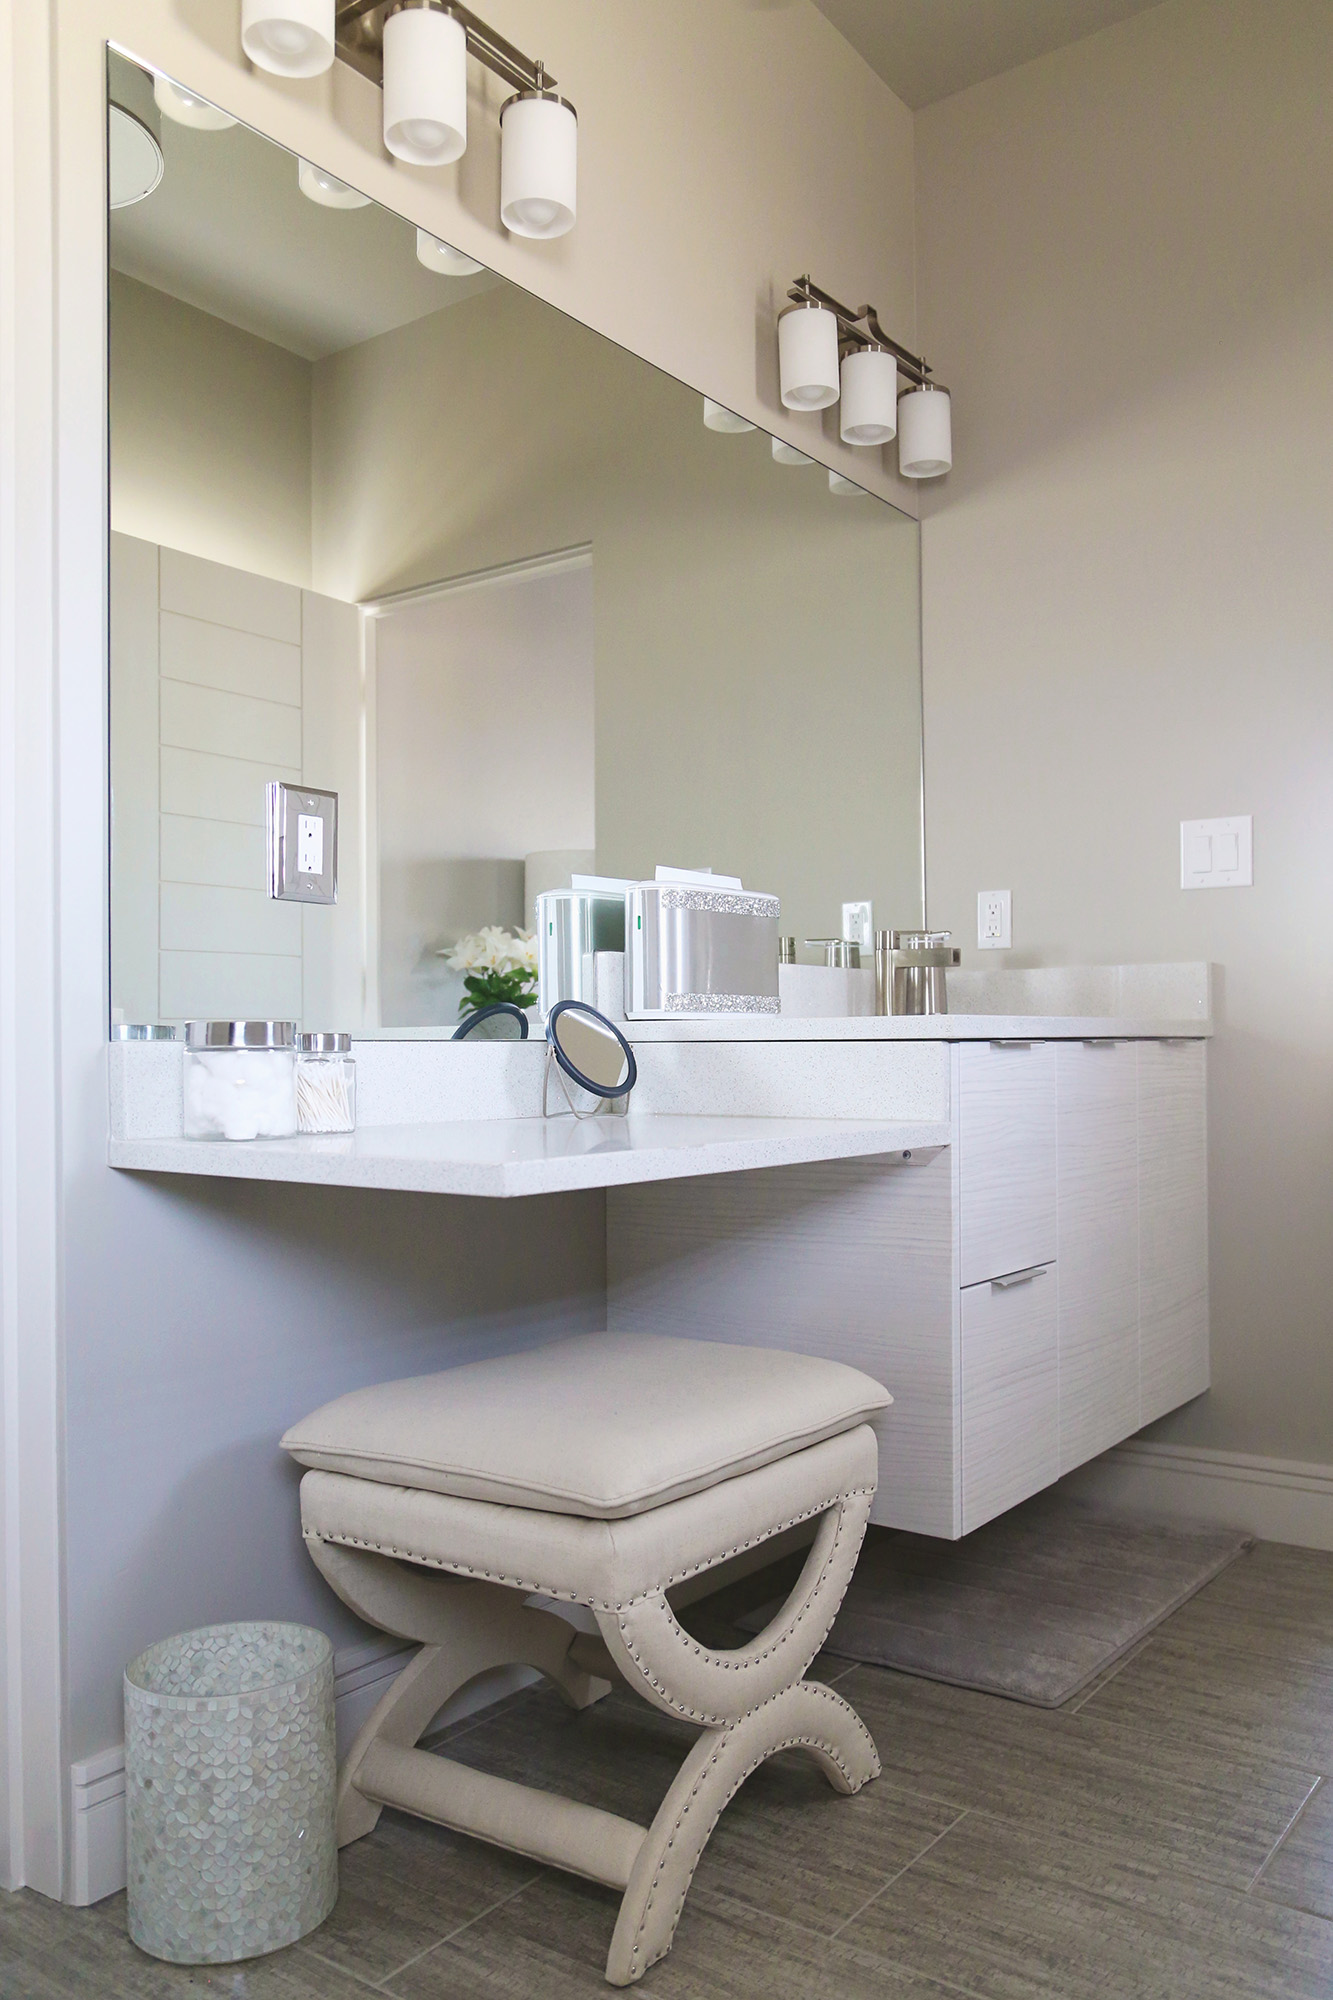 Floating Vanity Cabinet White Counter Seating Space Mirror Wall Sconces Elite Cabinets Tulsa Cabinet Bath Remodel